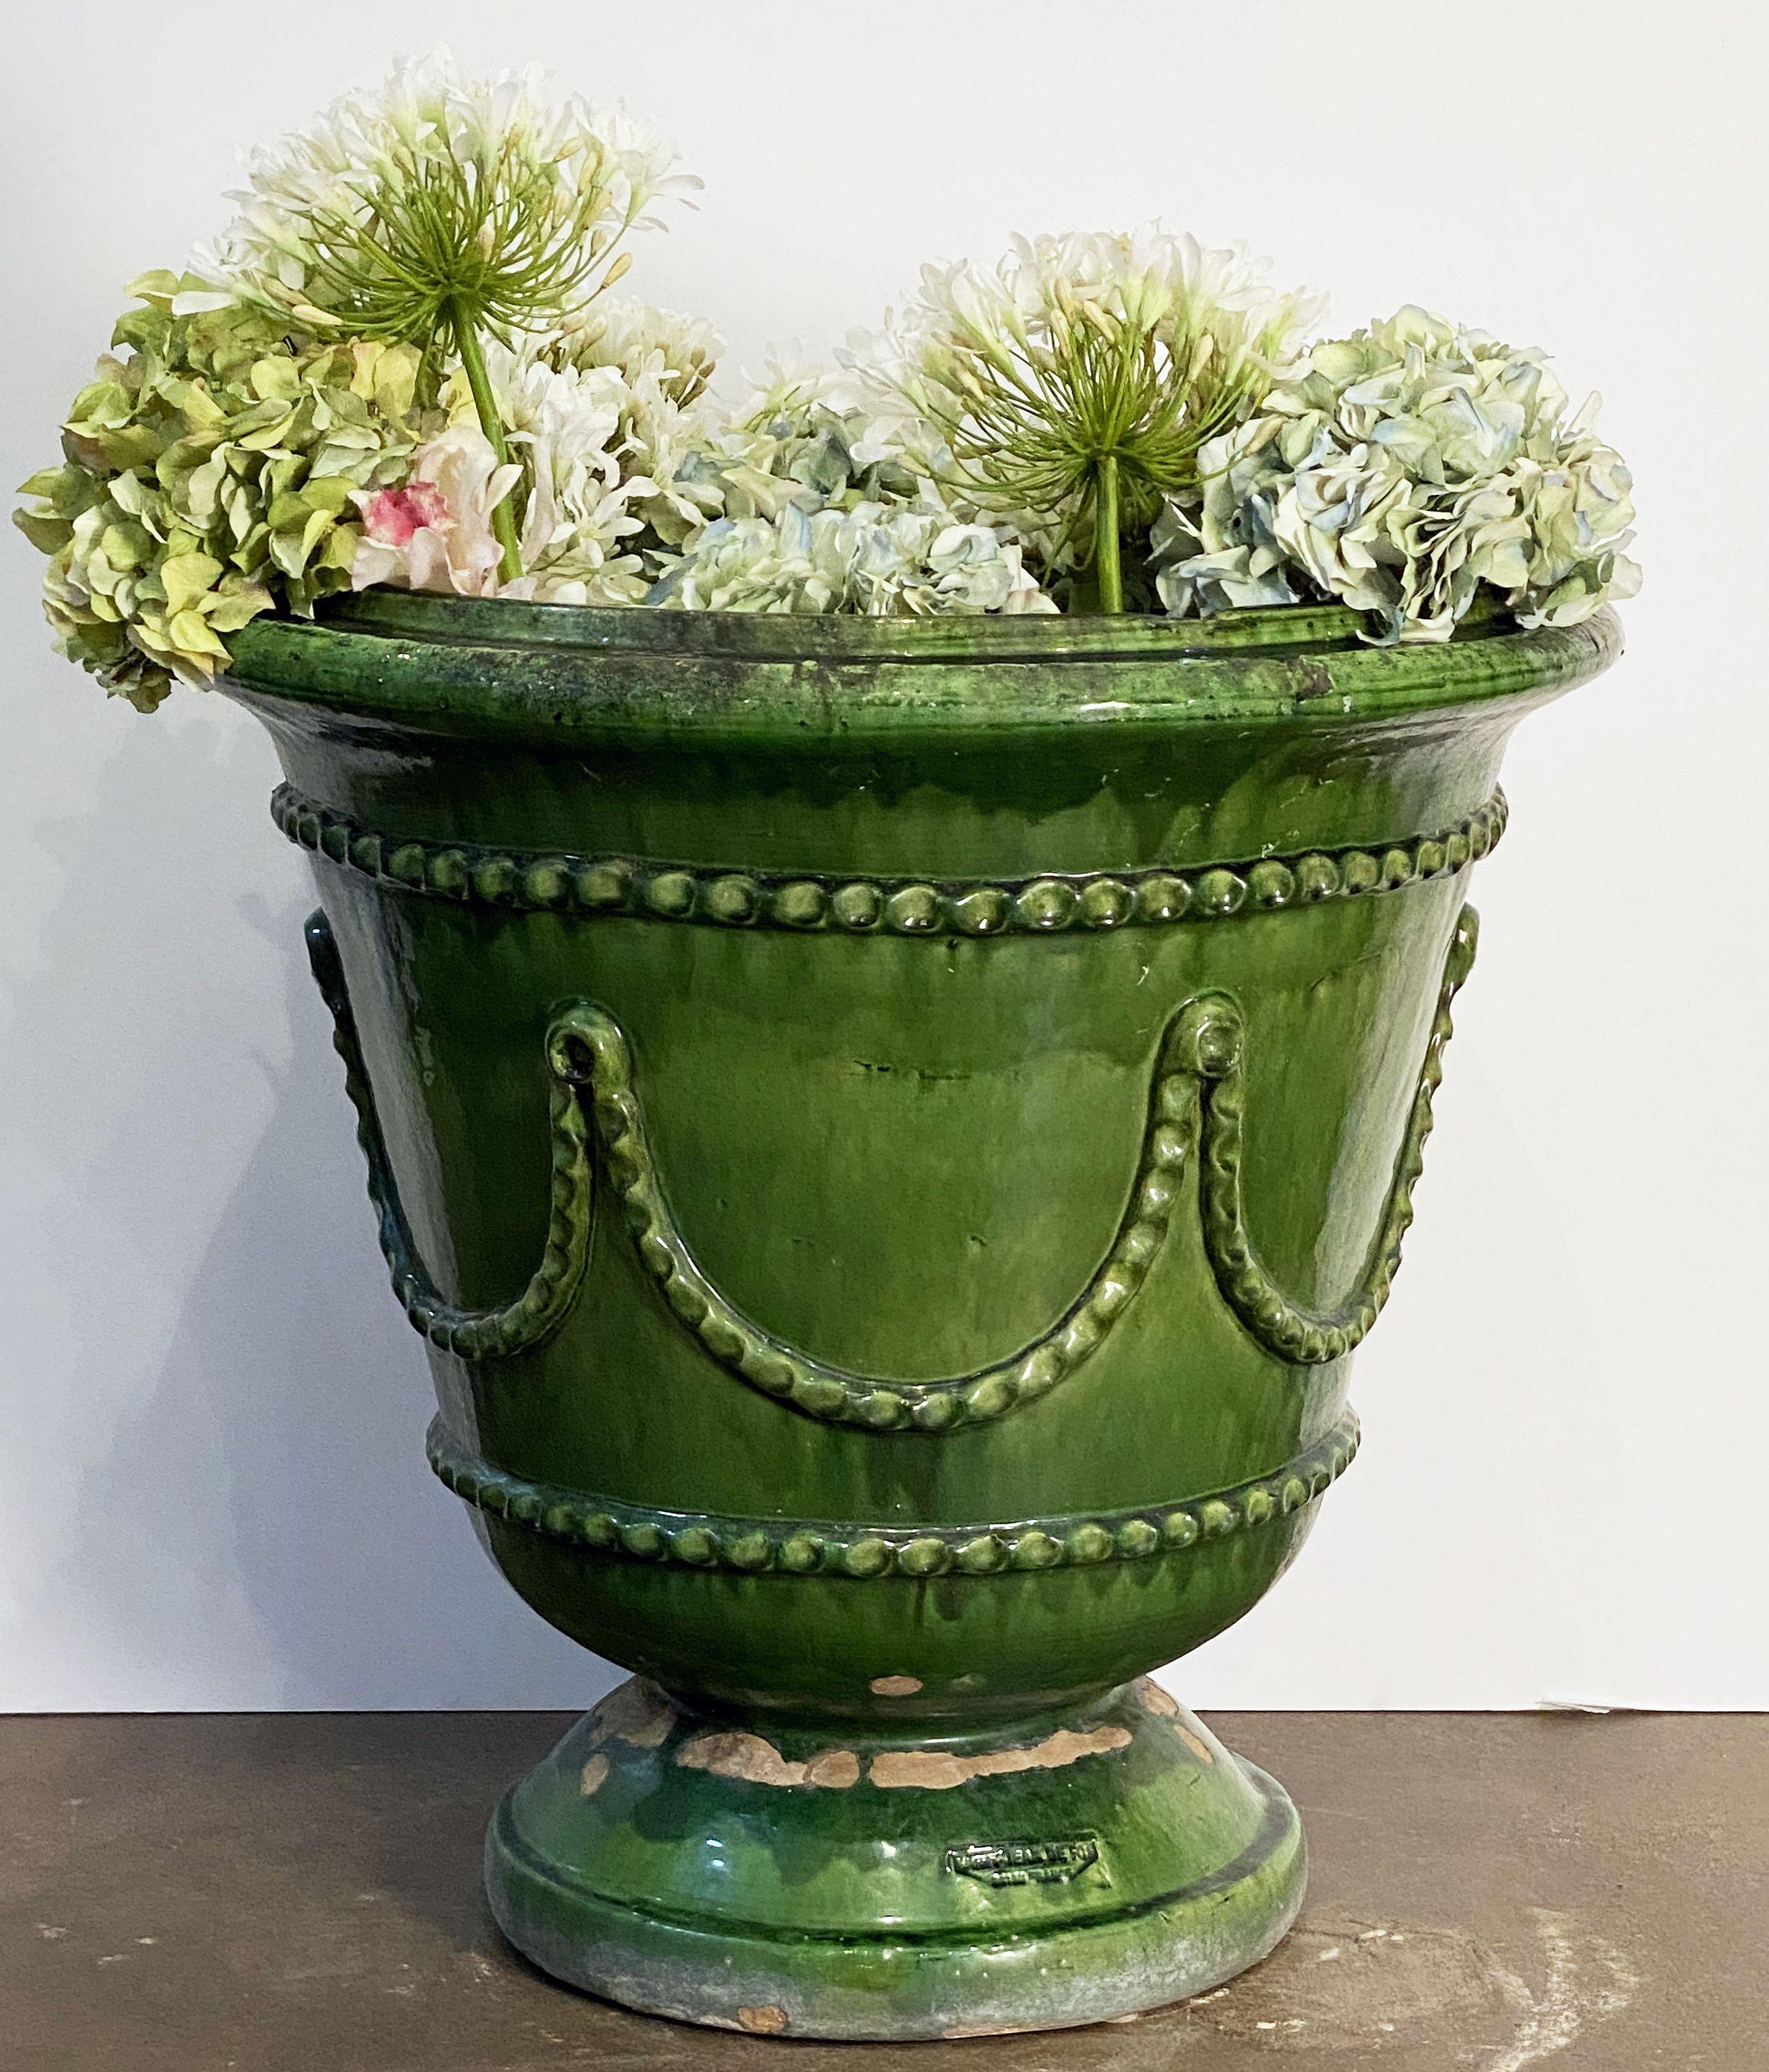 A fine large French garden planter pot or urn featuring the brilliant green-glazed earthenware hues of Castelnaudary pottery and a stylish relief design around the whole.

With impressed pottery marks on interior and at base - POTERIE DES GORGES